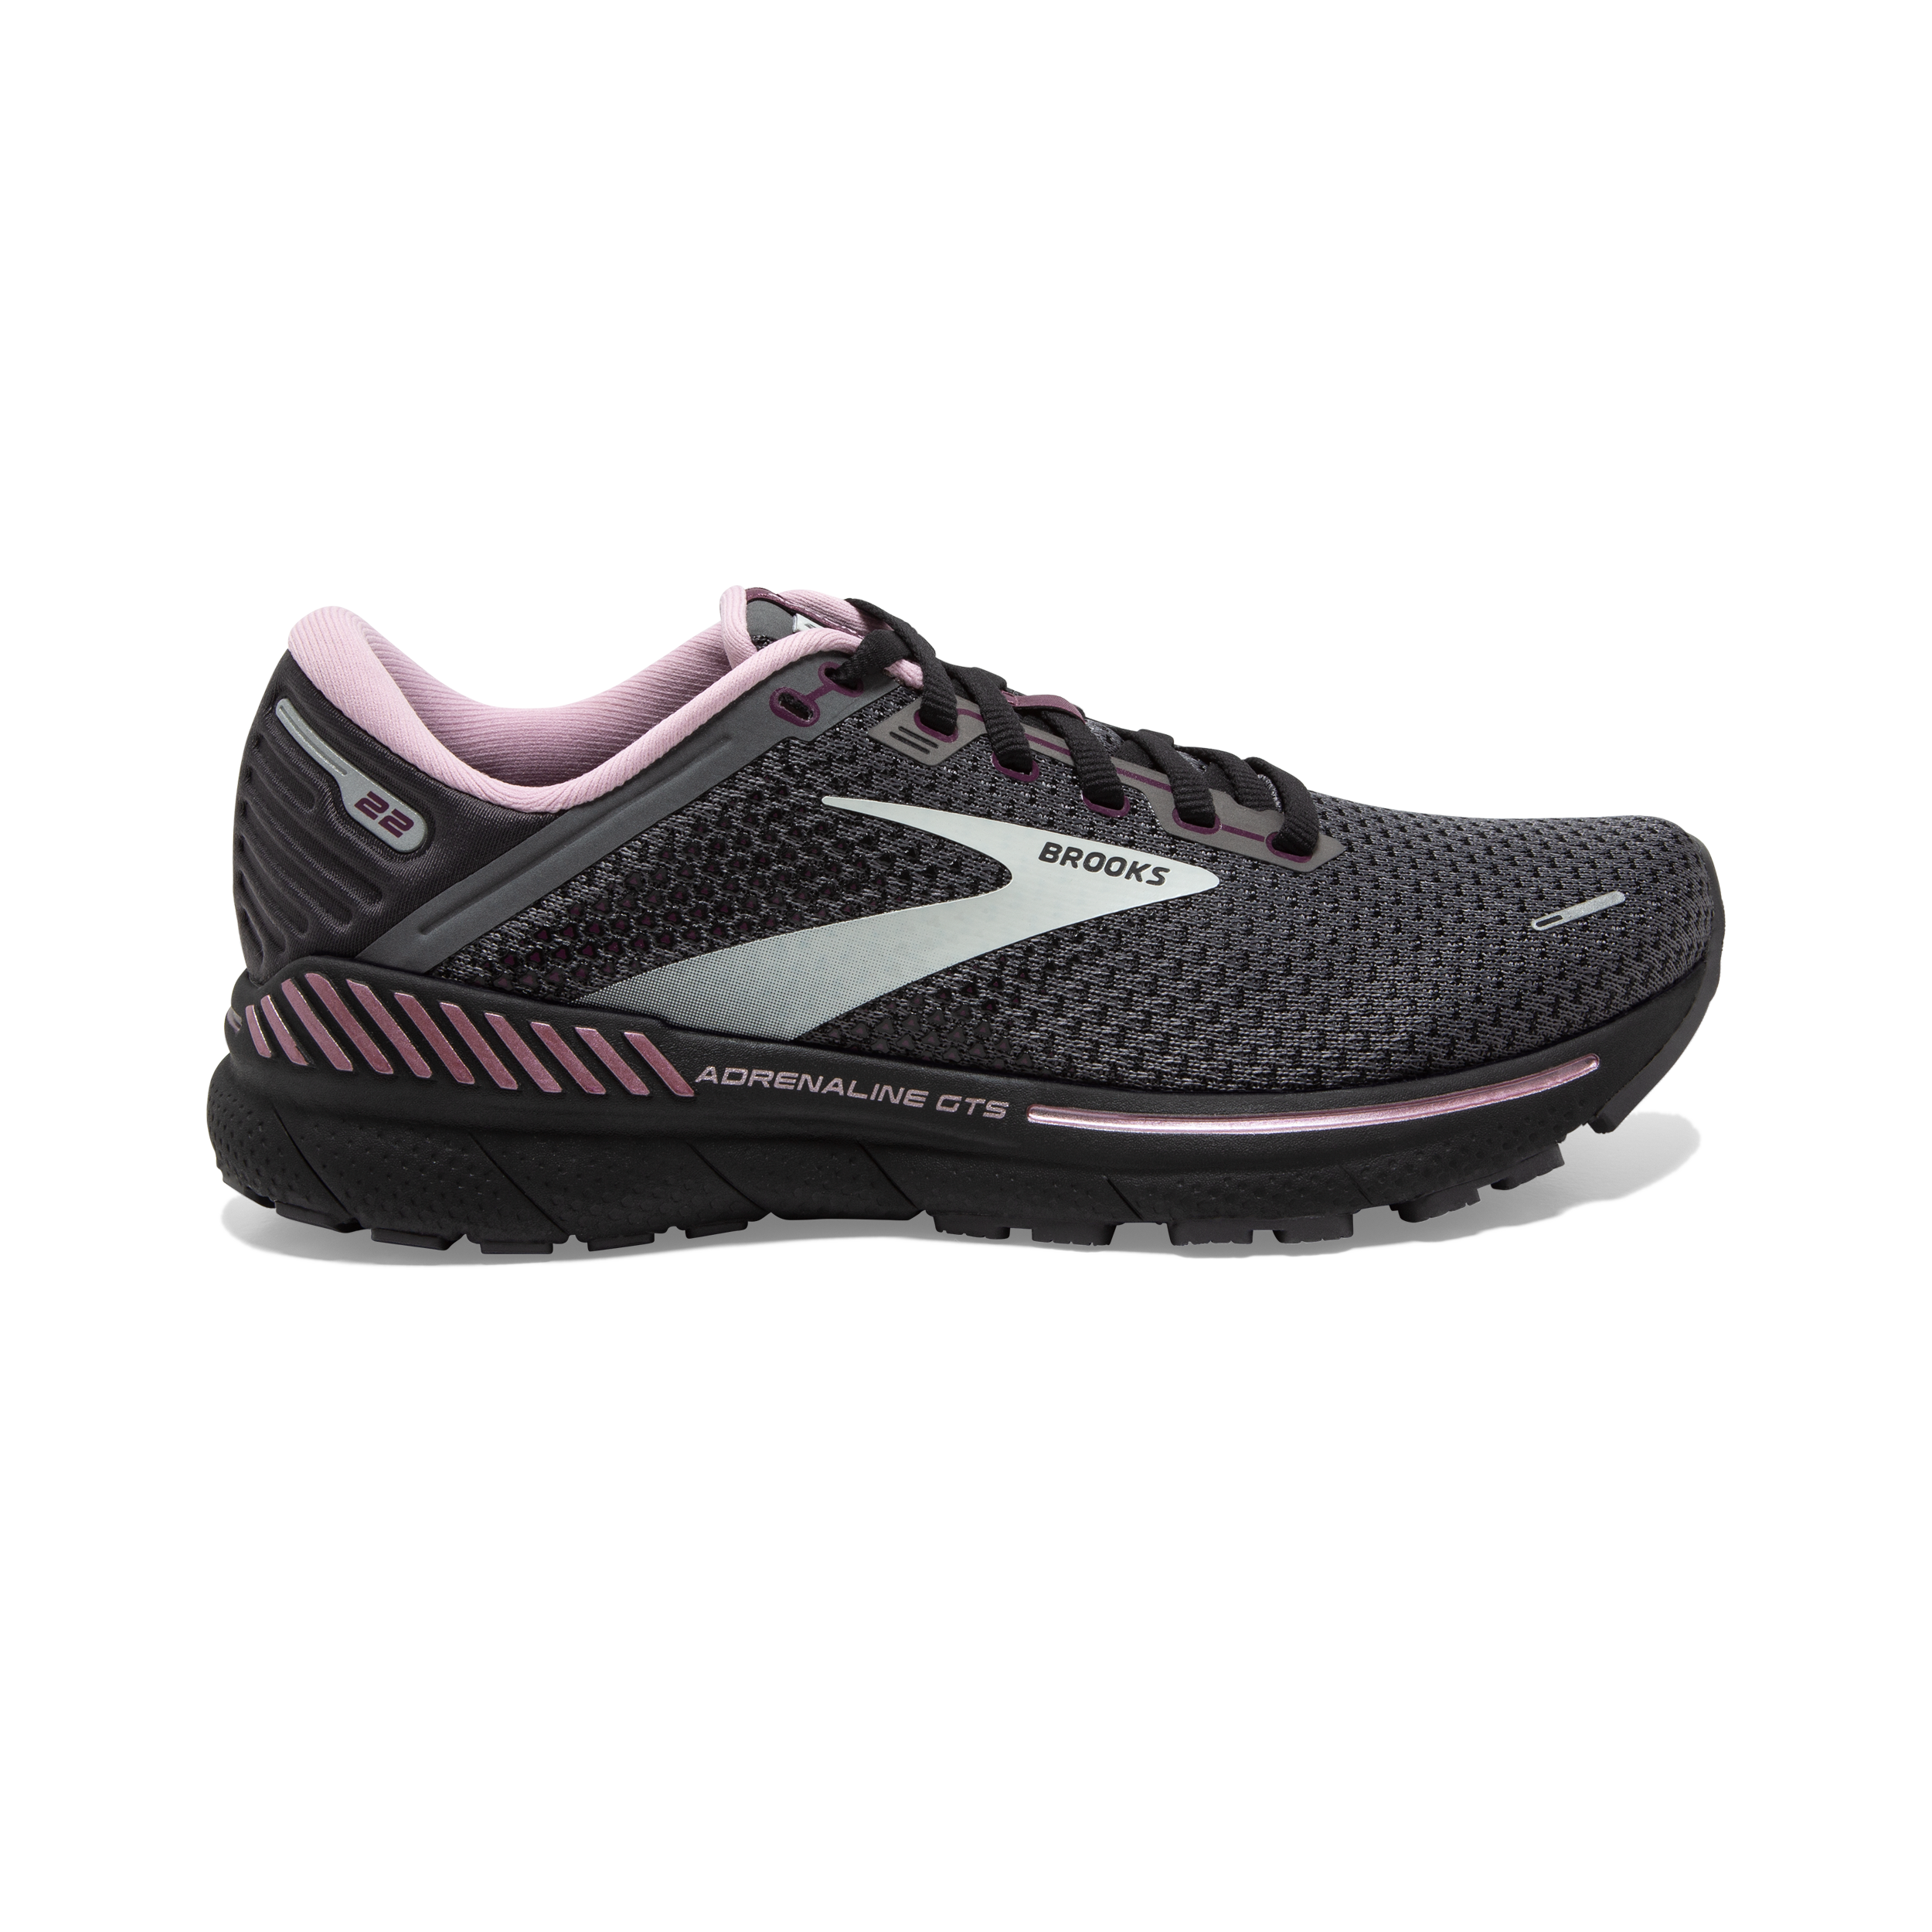 What Kind of Shoe is Brooks Adrenaline?